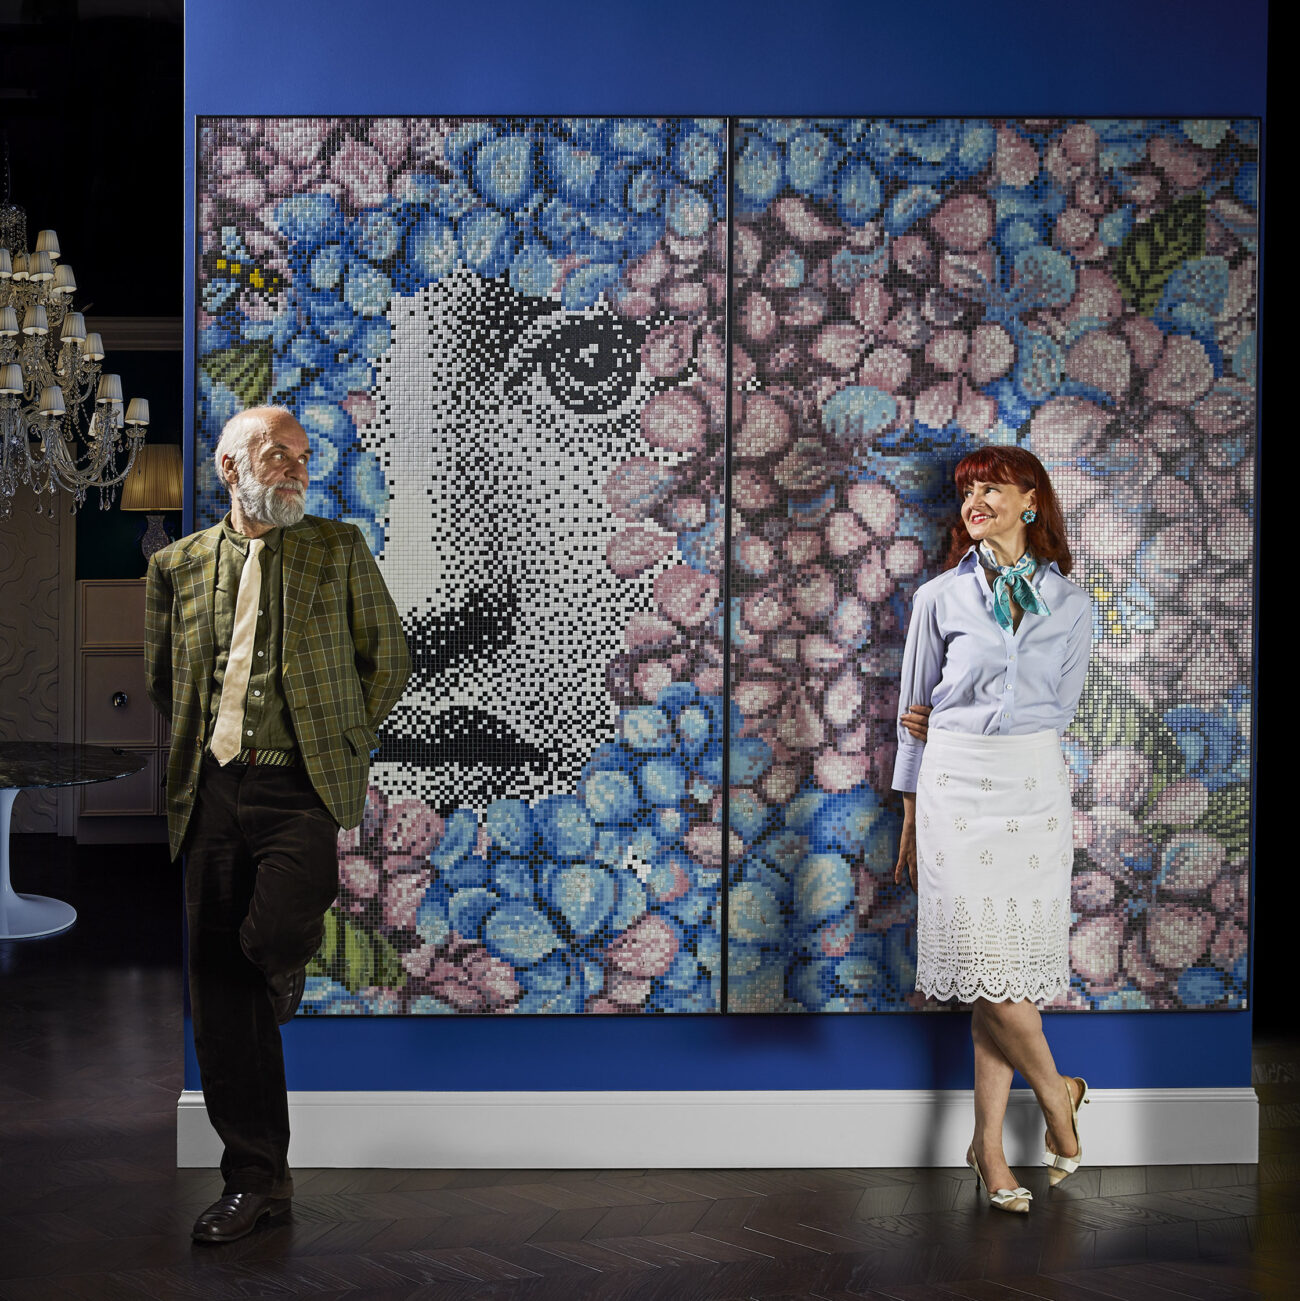 Rossella Bisazza (right) and Barnaba Fornasetti in the Fornasetti Milan showroom.